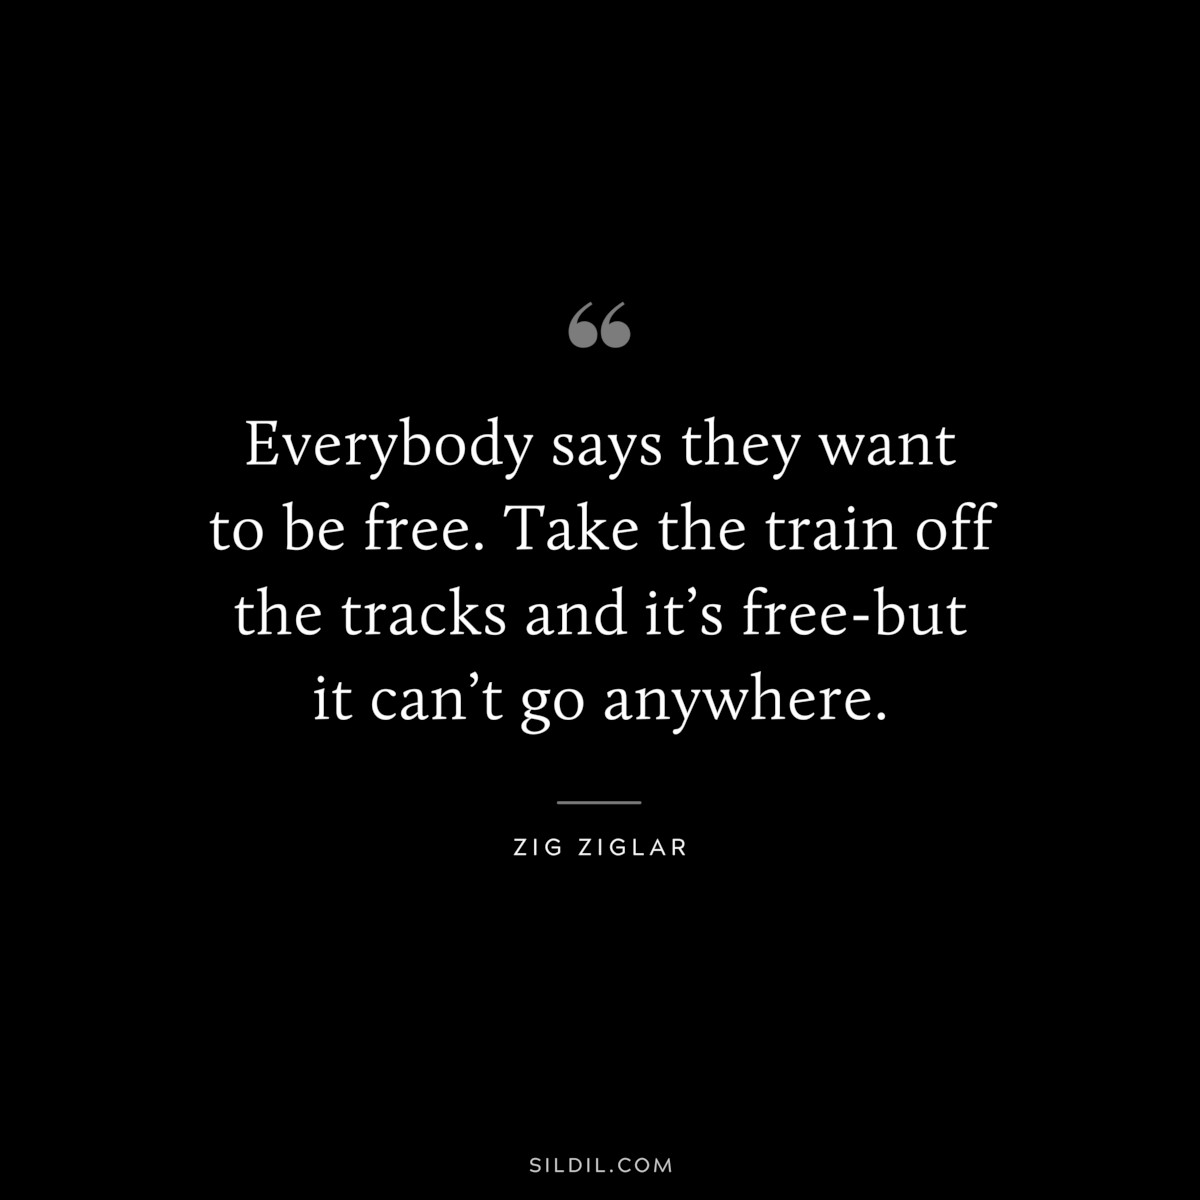 Everybody says they want to be free. Take the train off the tracks and it’s free-but it can’t go anywhere. ― Zig Ziglar